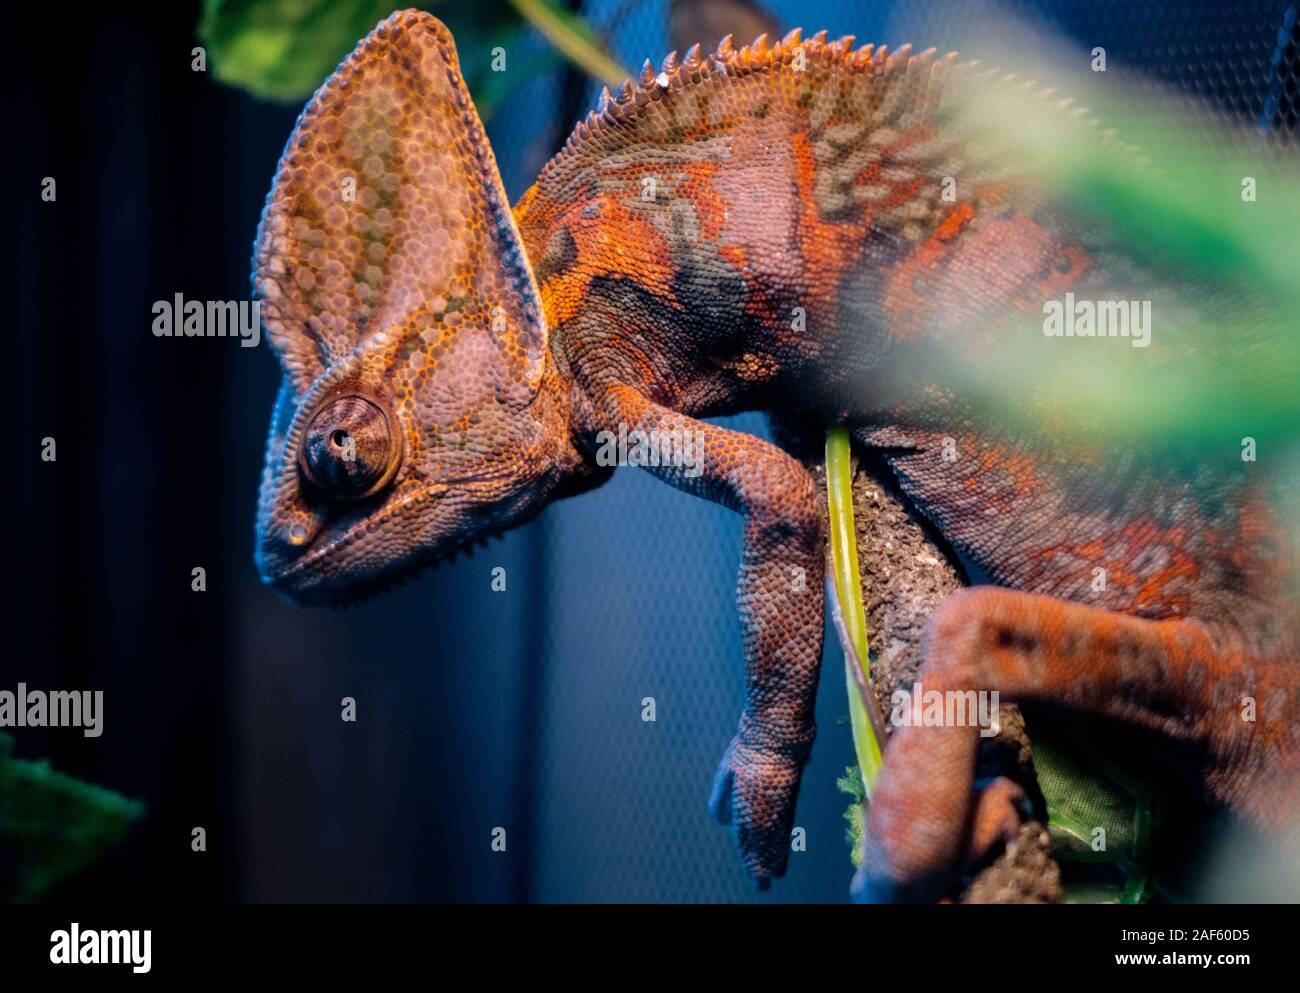 Chameleon red and orange in the close-up of terrarium reptile lizard Stock Photo